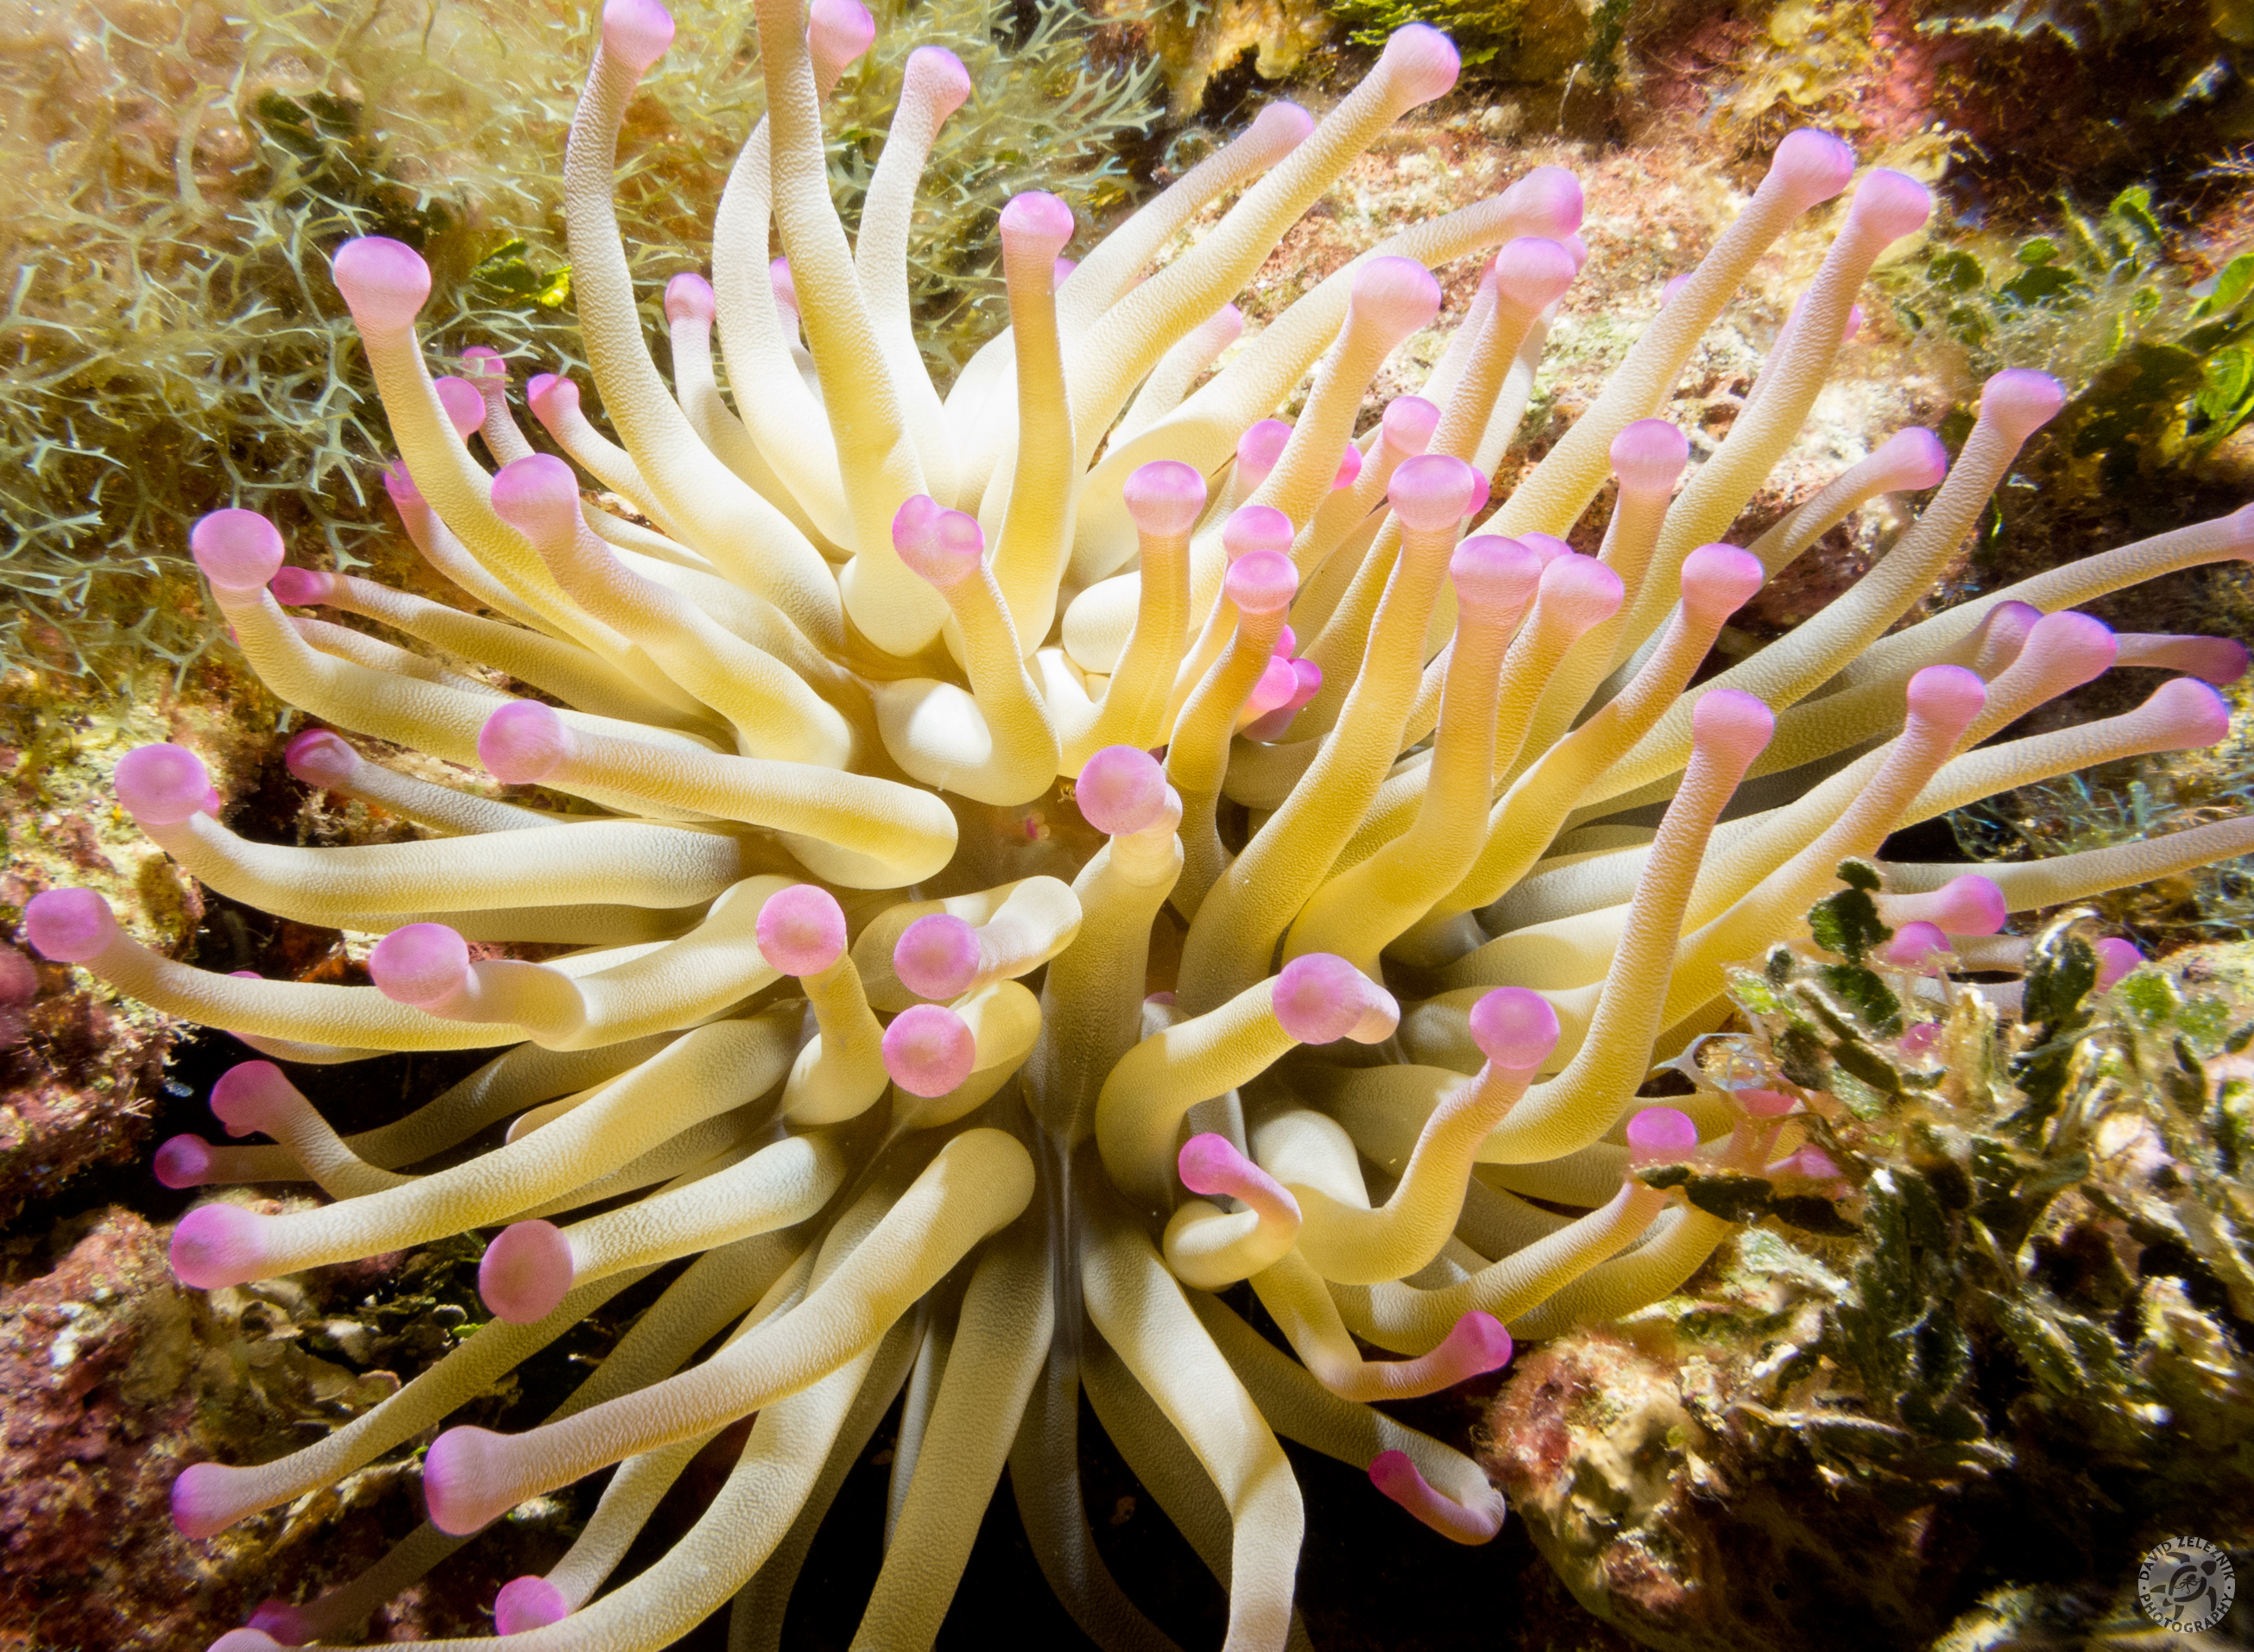 This Giant Anemone was at least a foot across